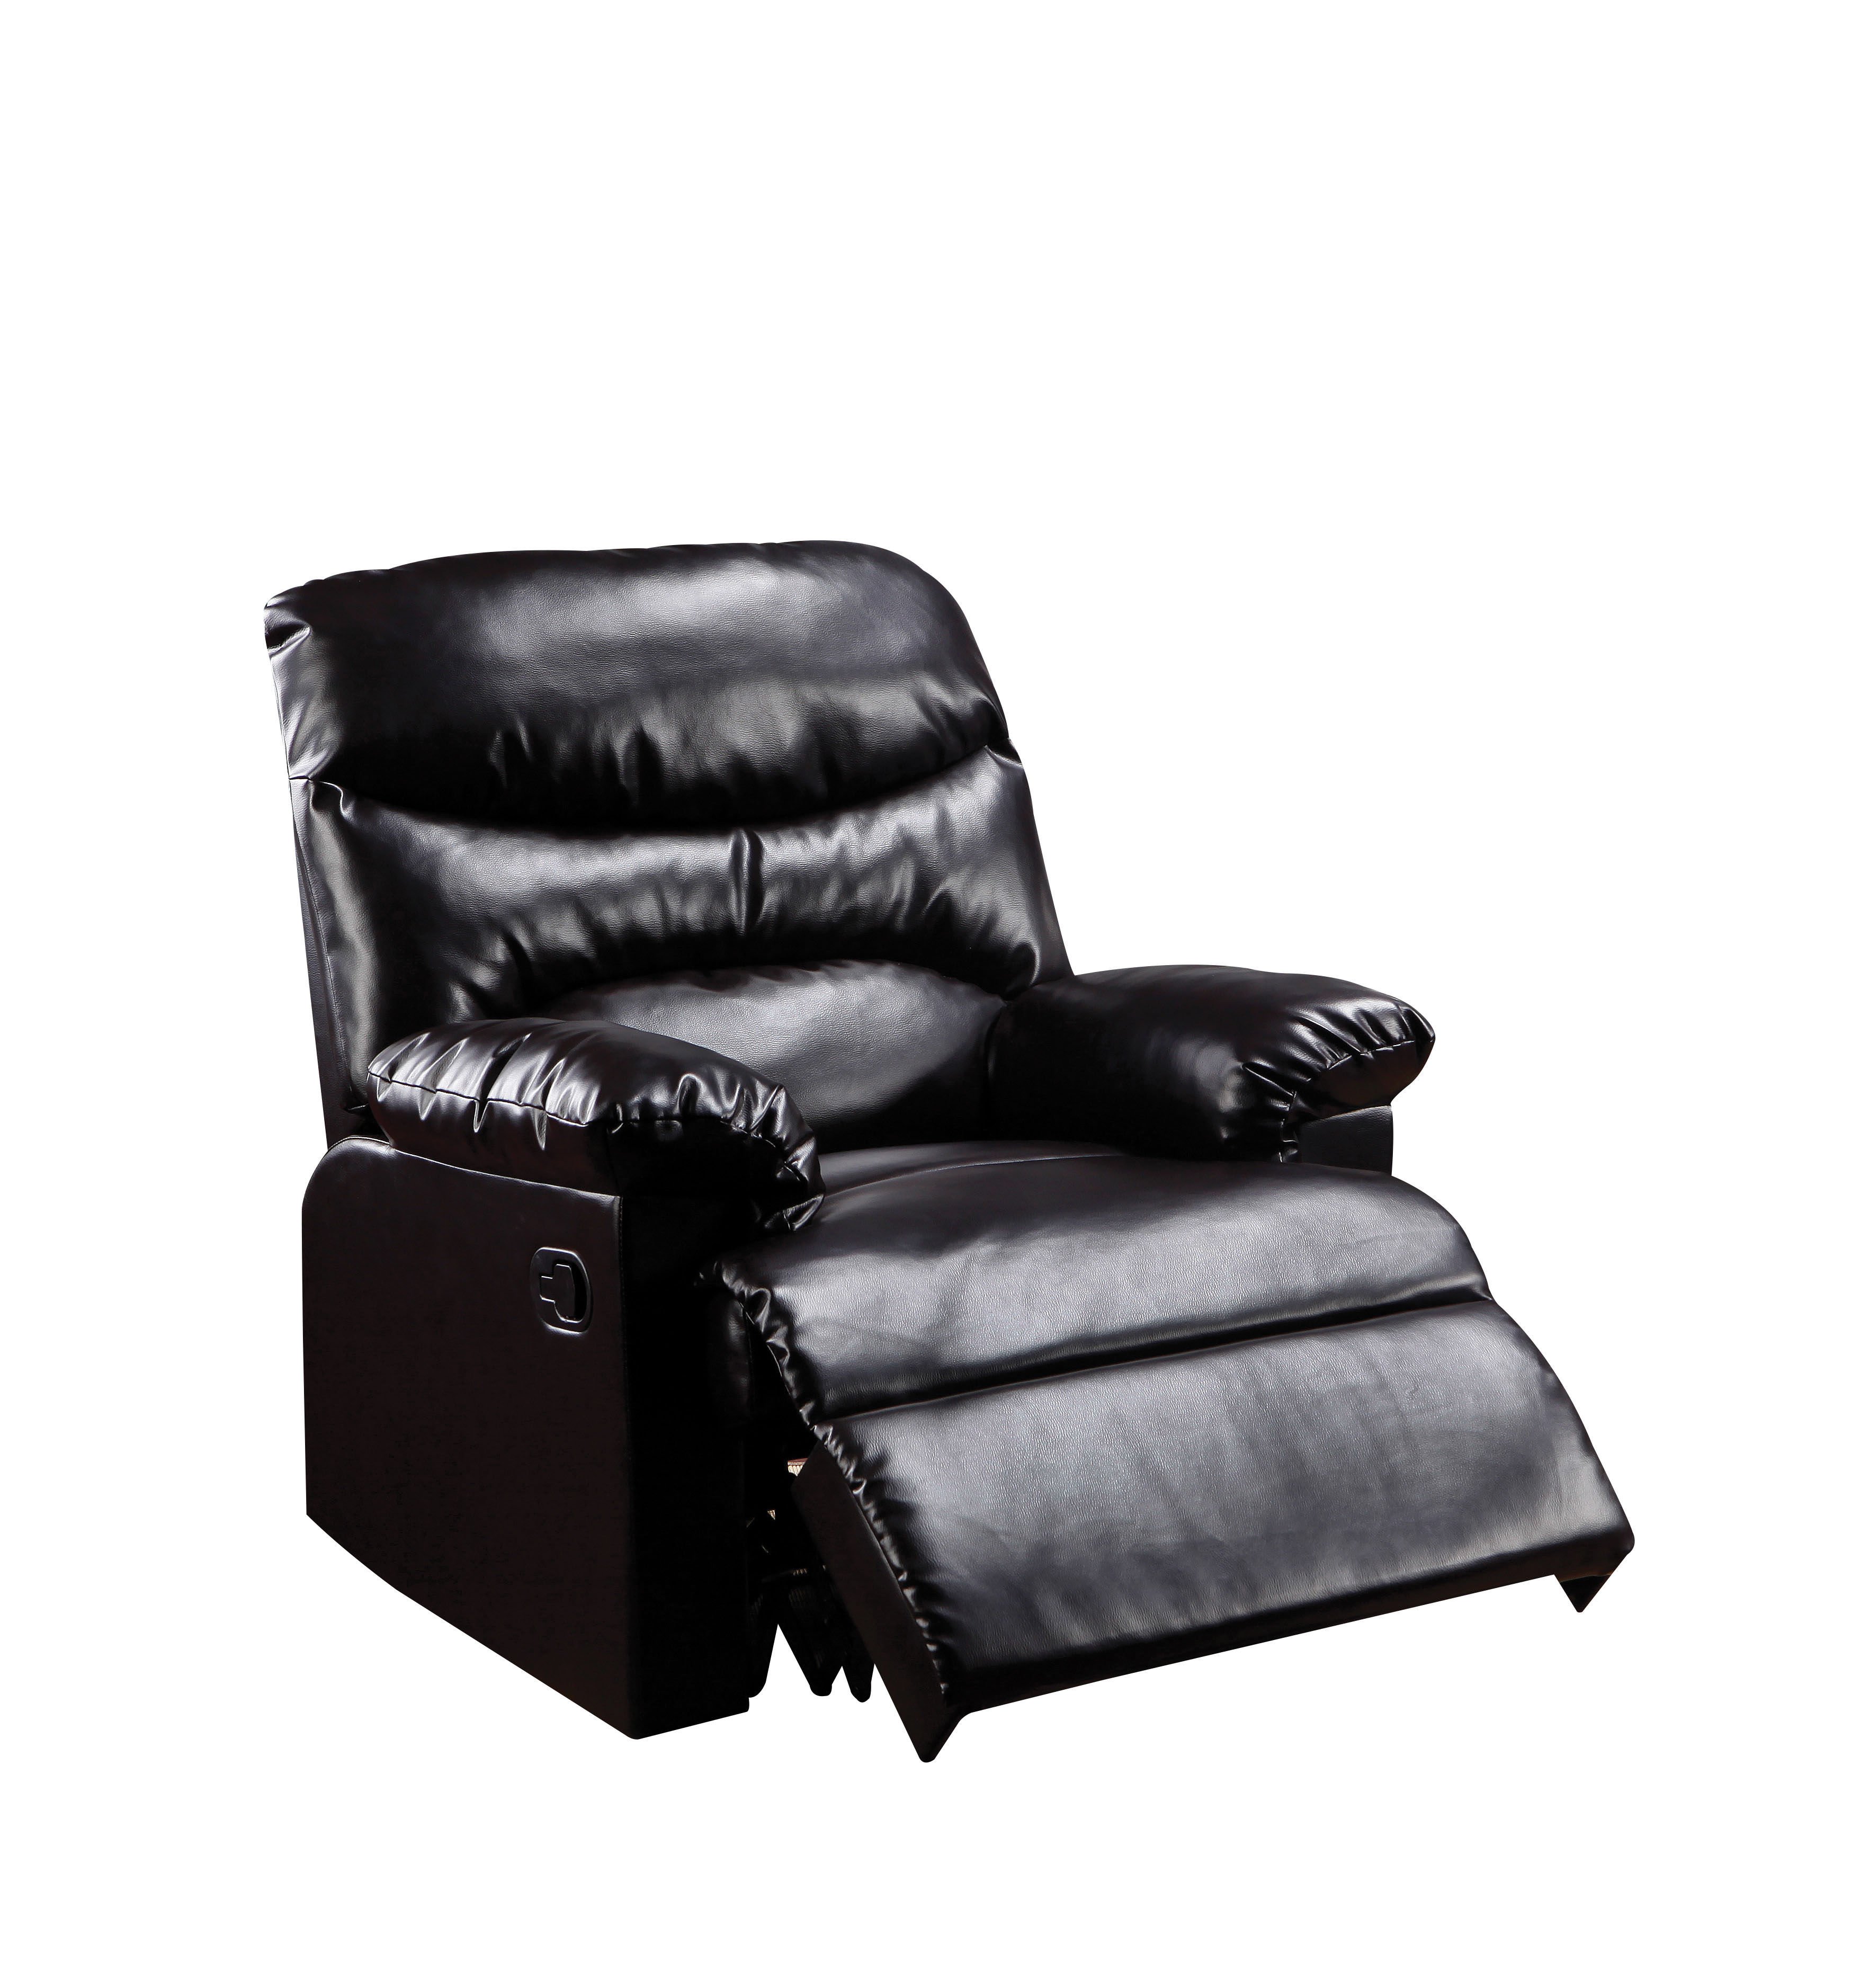 Acme Furniture Arcadia Recliner in Espresso Bonded Leather - image 1 of 2